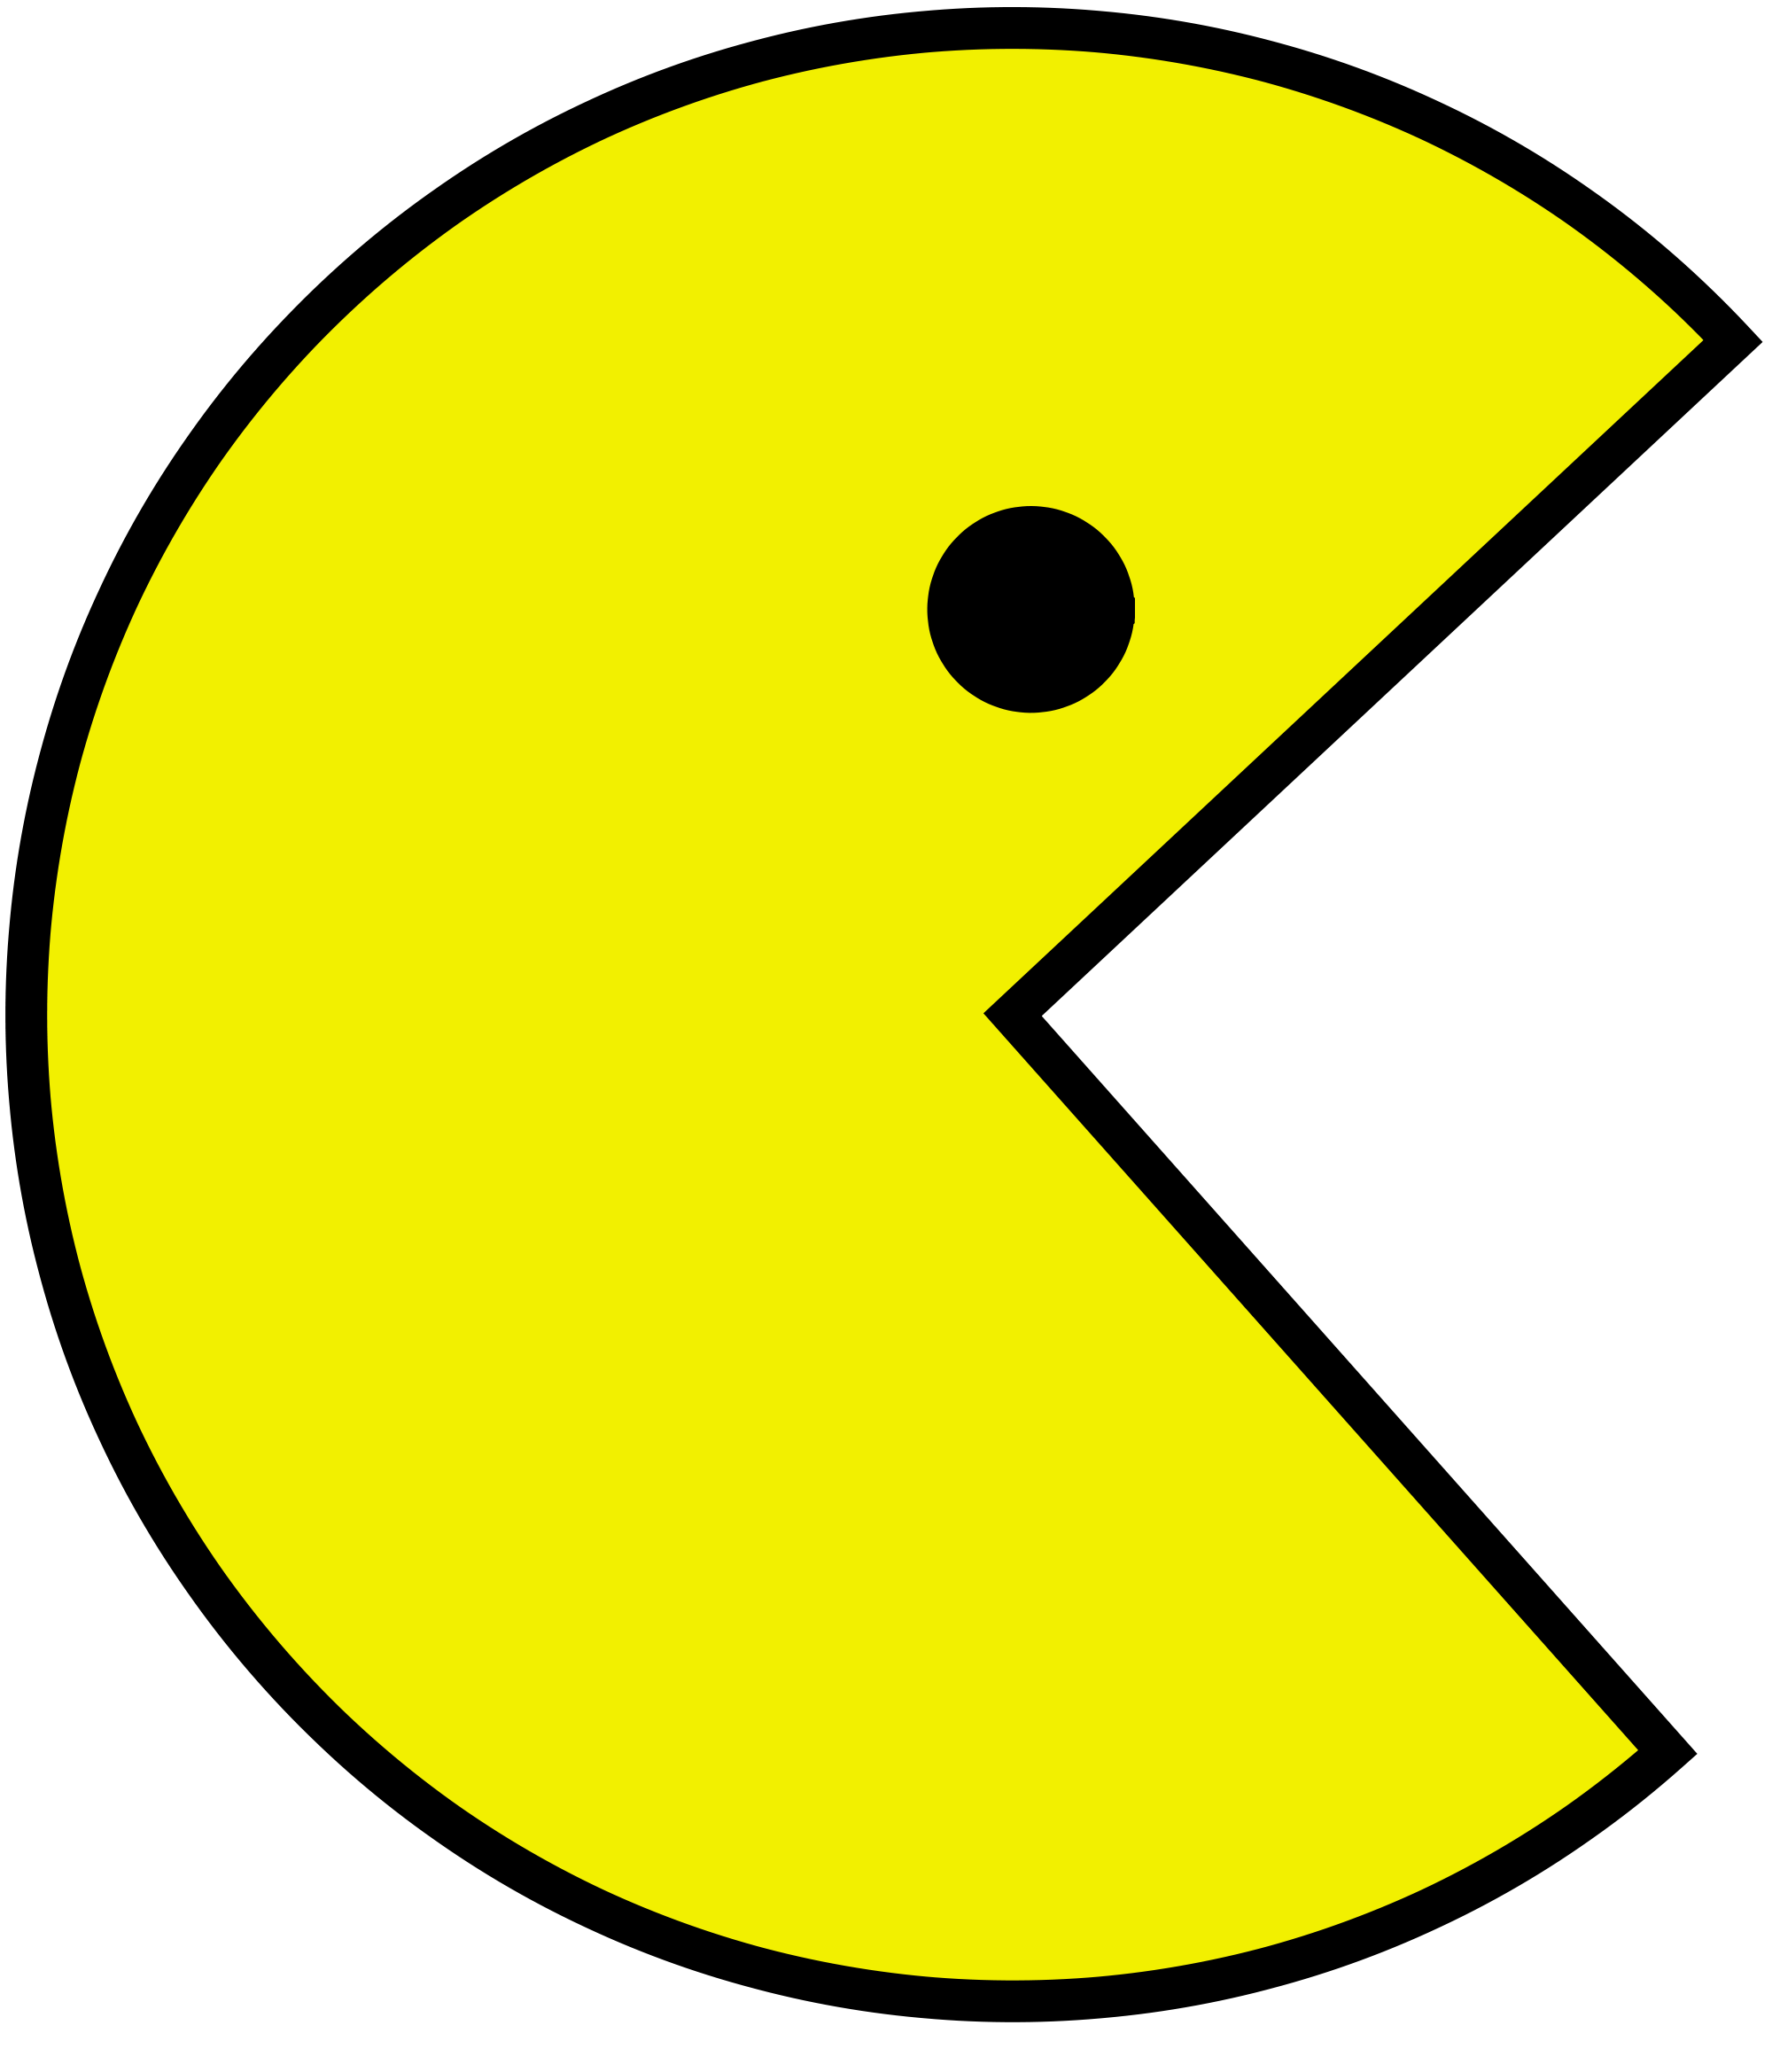 Pac-Man | Know Your Meme